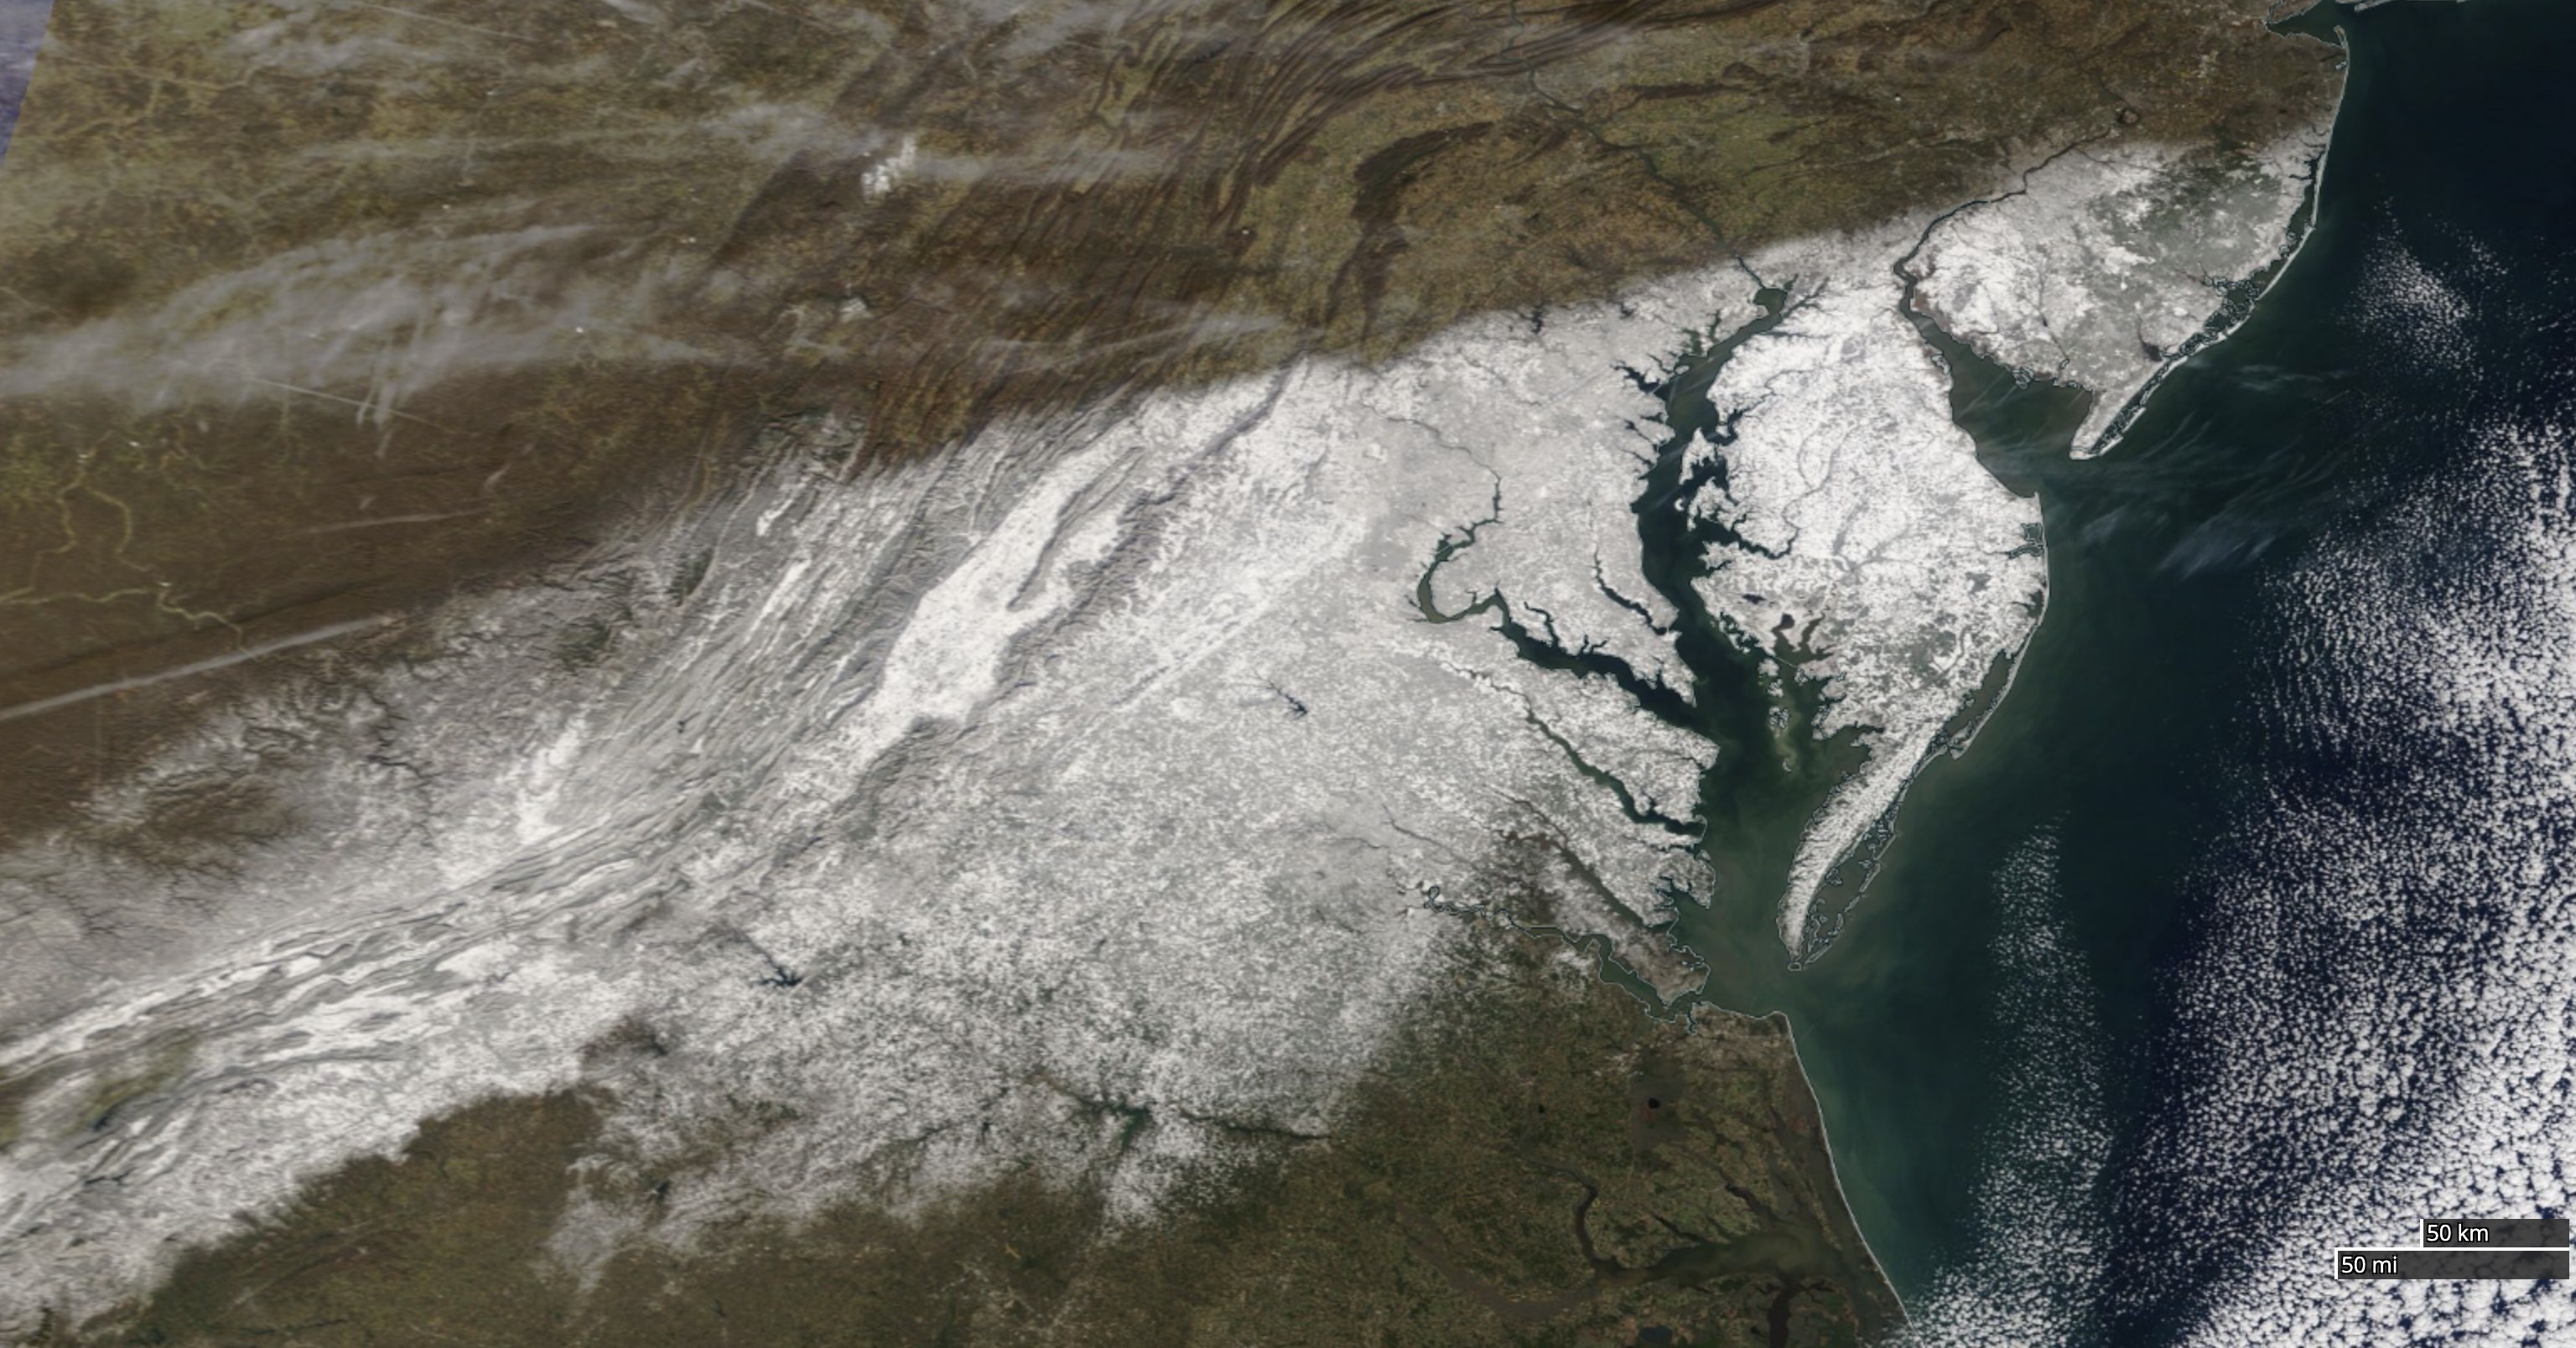 A view of the Chesapeake Bay nearly completely bordered by snow on January, 4, 2022. Photo Credit: NASA Earth Observing System Data and Information System